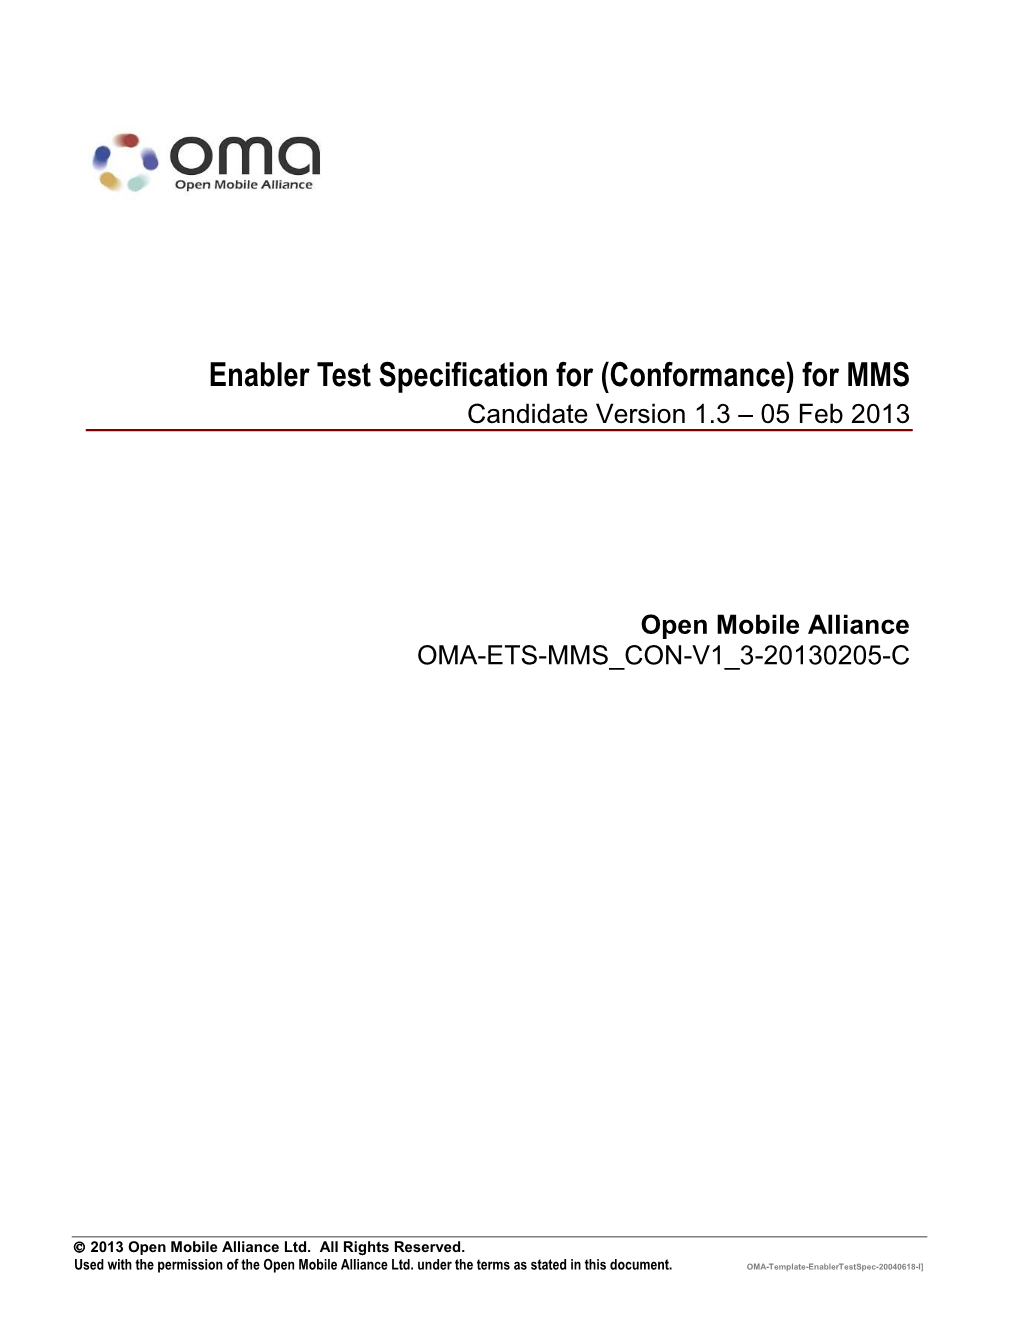 OMA MMS Enabler Test Specification